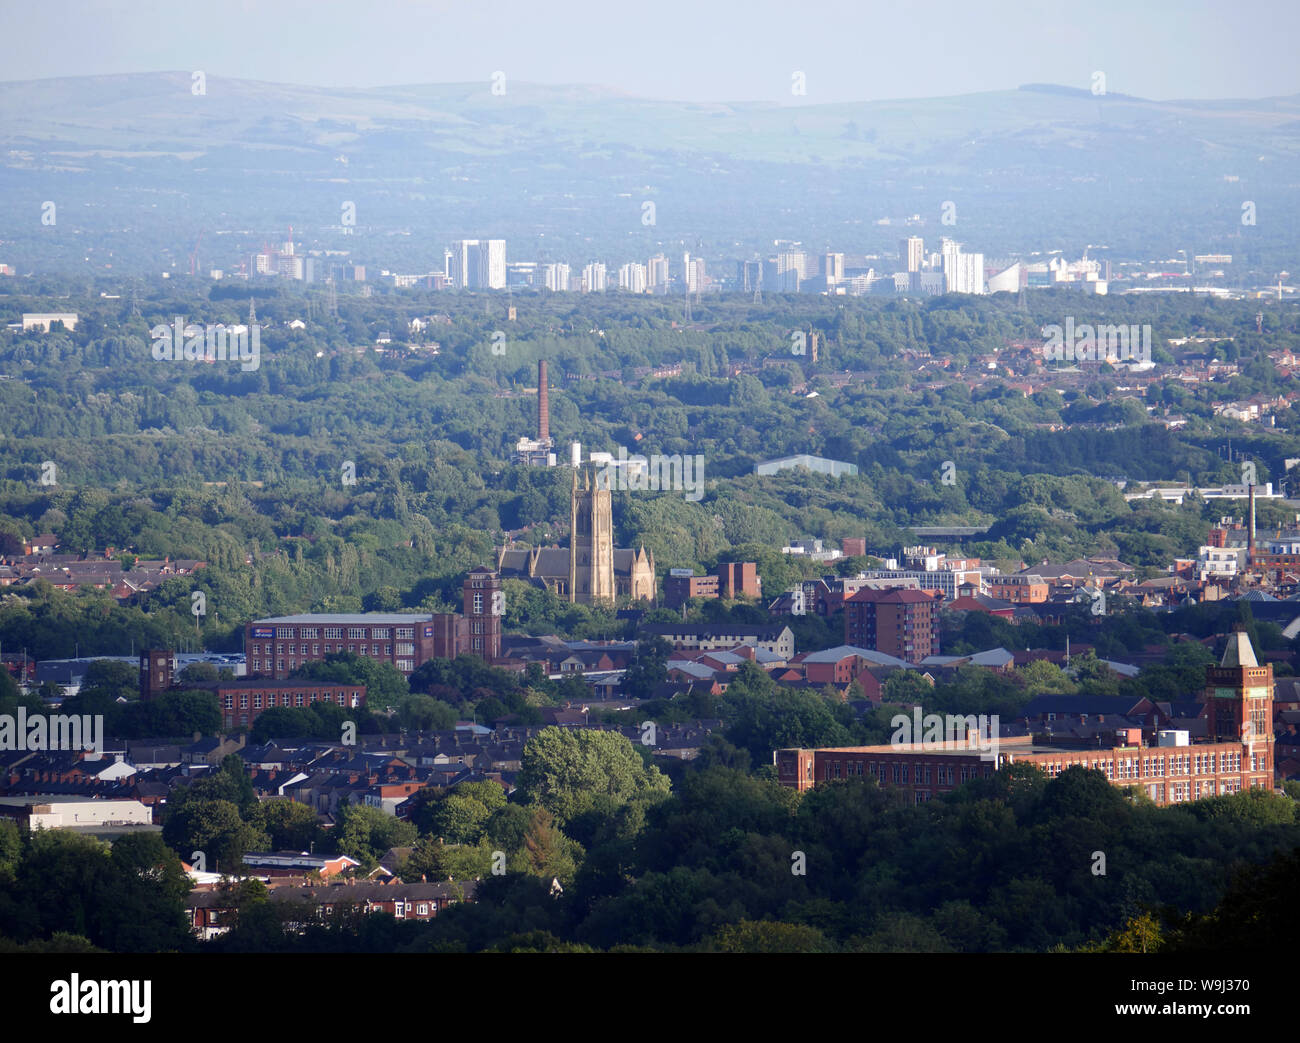 View looking over the town Bolton with the City of Manchester in the distance, Falcon Mill lower right, Bolton Parish Church central. photo DON TONGE Stock Photo